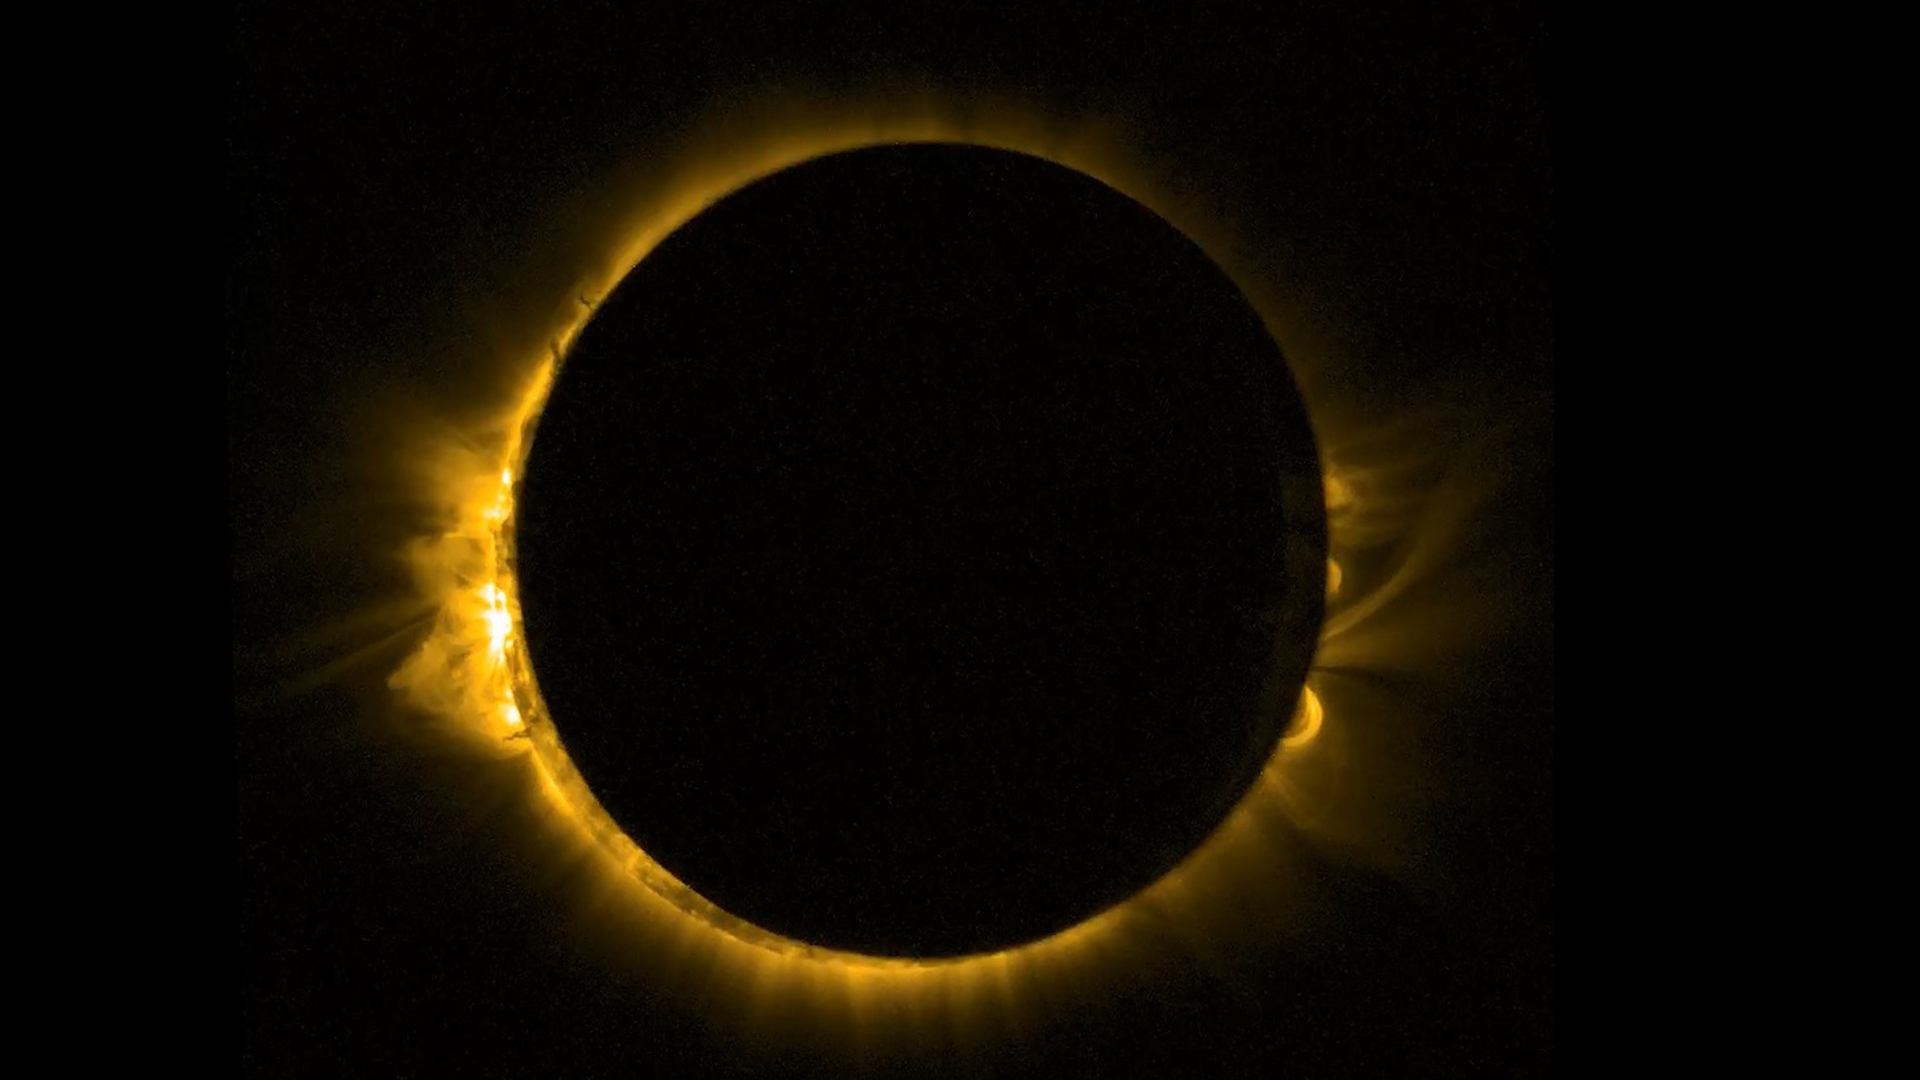 As Europe enjoyed a partial solar eclipse on the morning of Friday 20 March 2015.